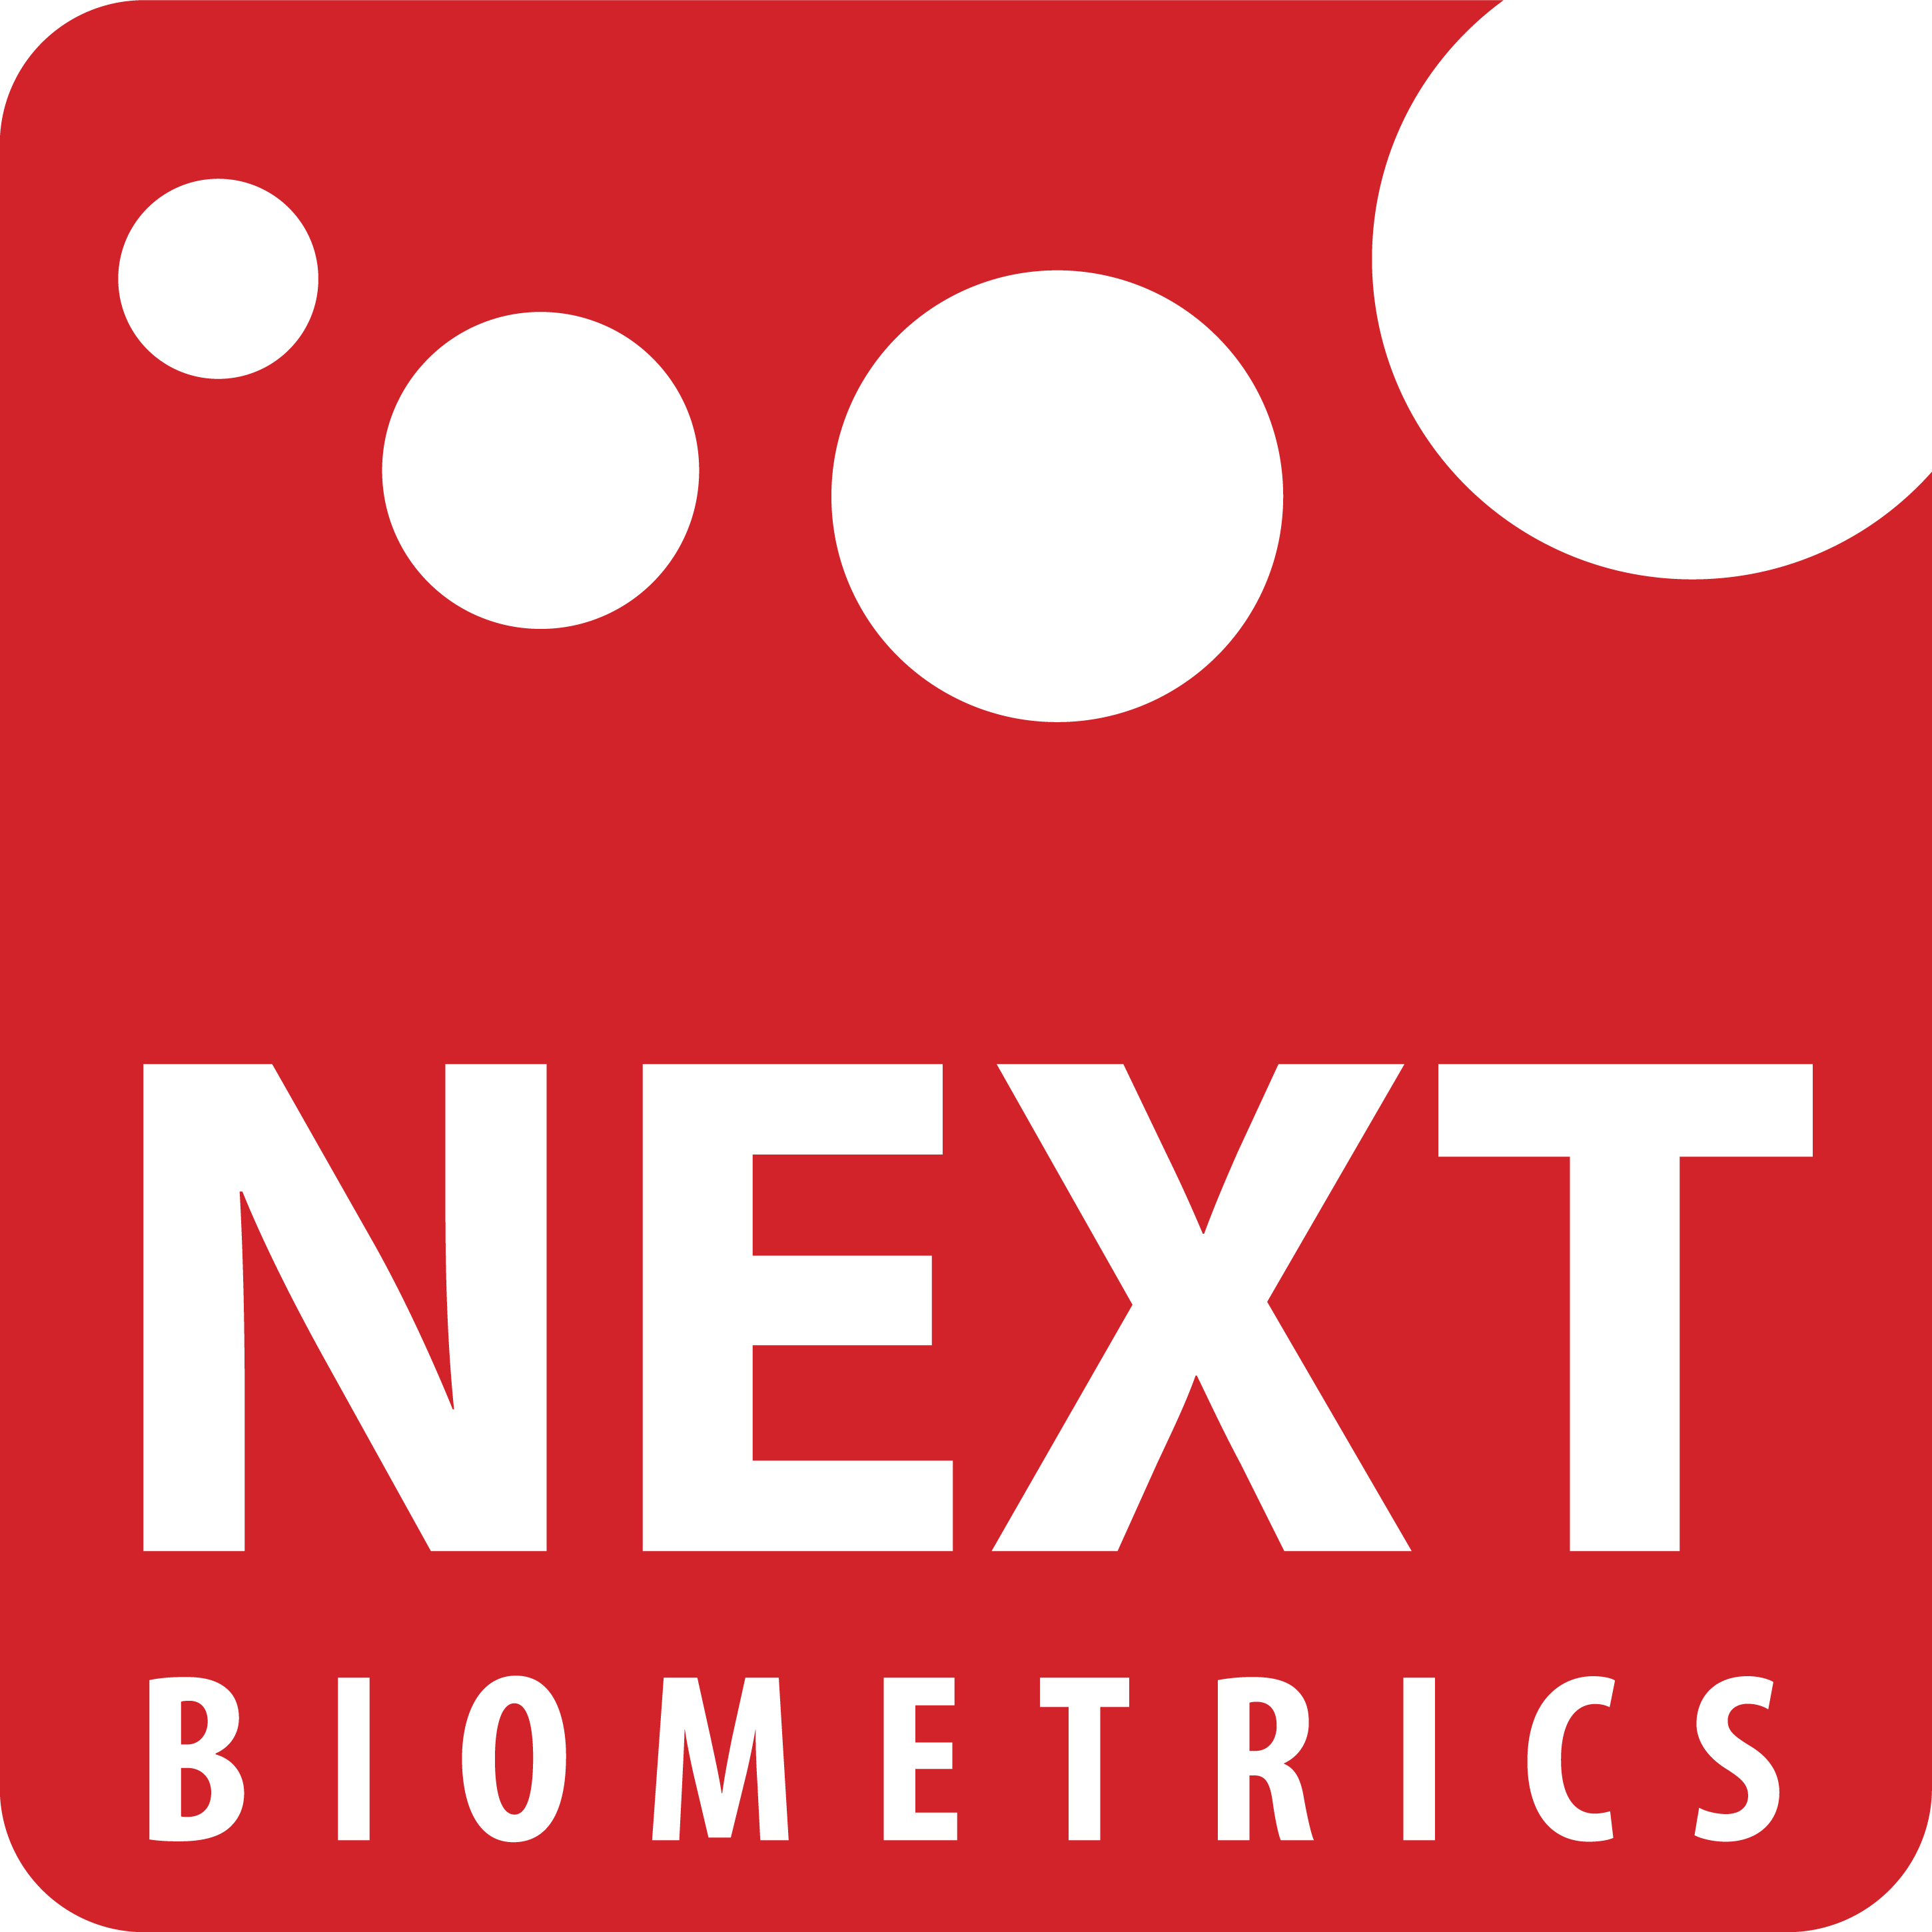 NEXT Biometrics offers high quality area fingerprint sensor at a fraction of the prices of comparable competitors.